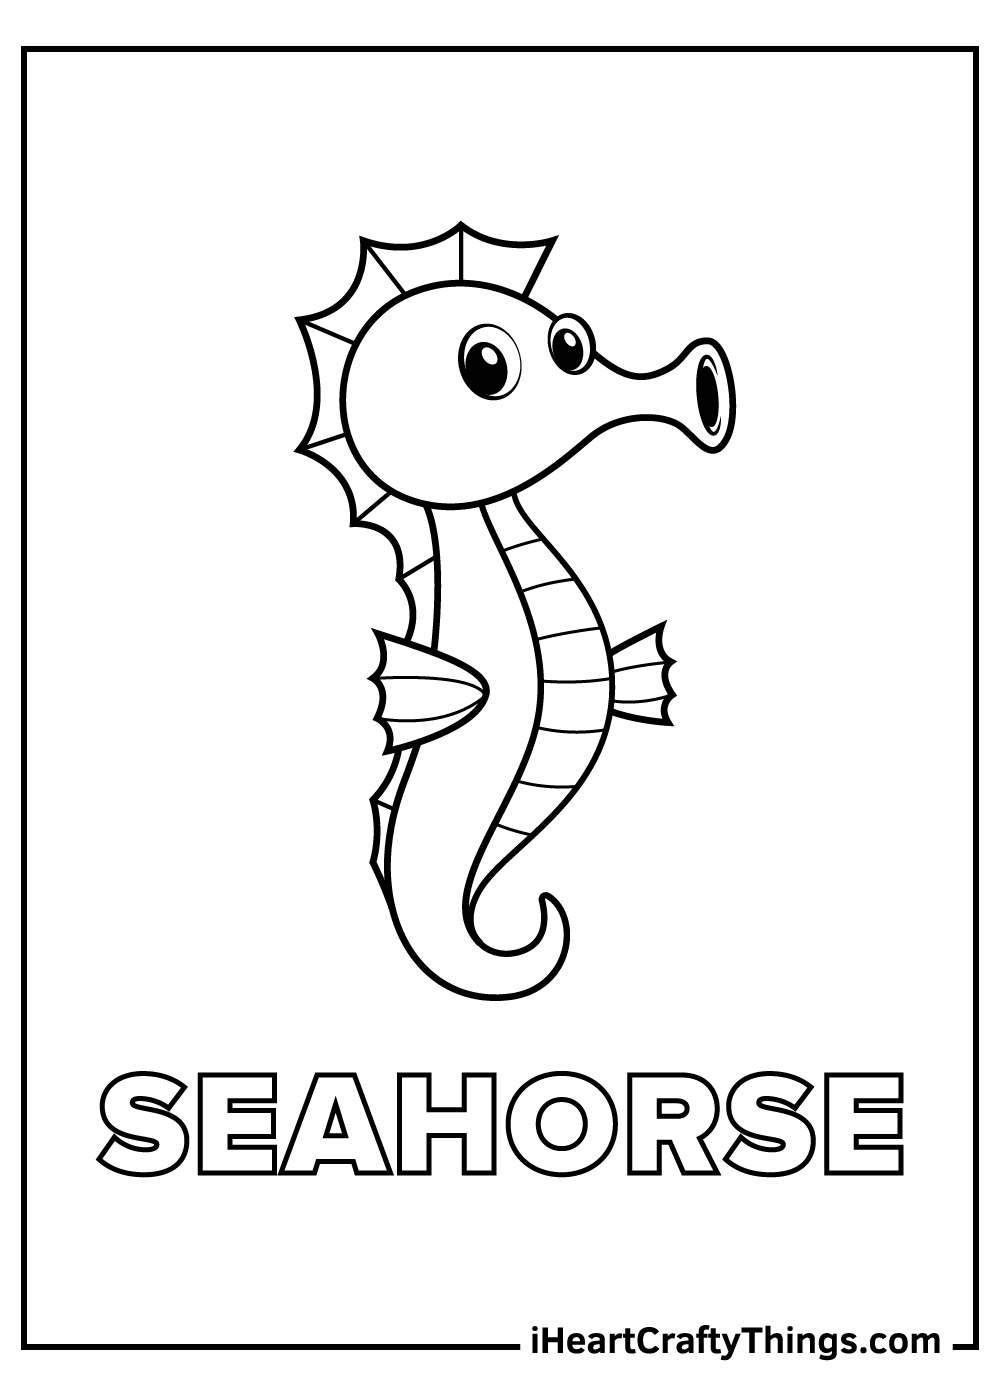 Seahorse coloring pages free printables